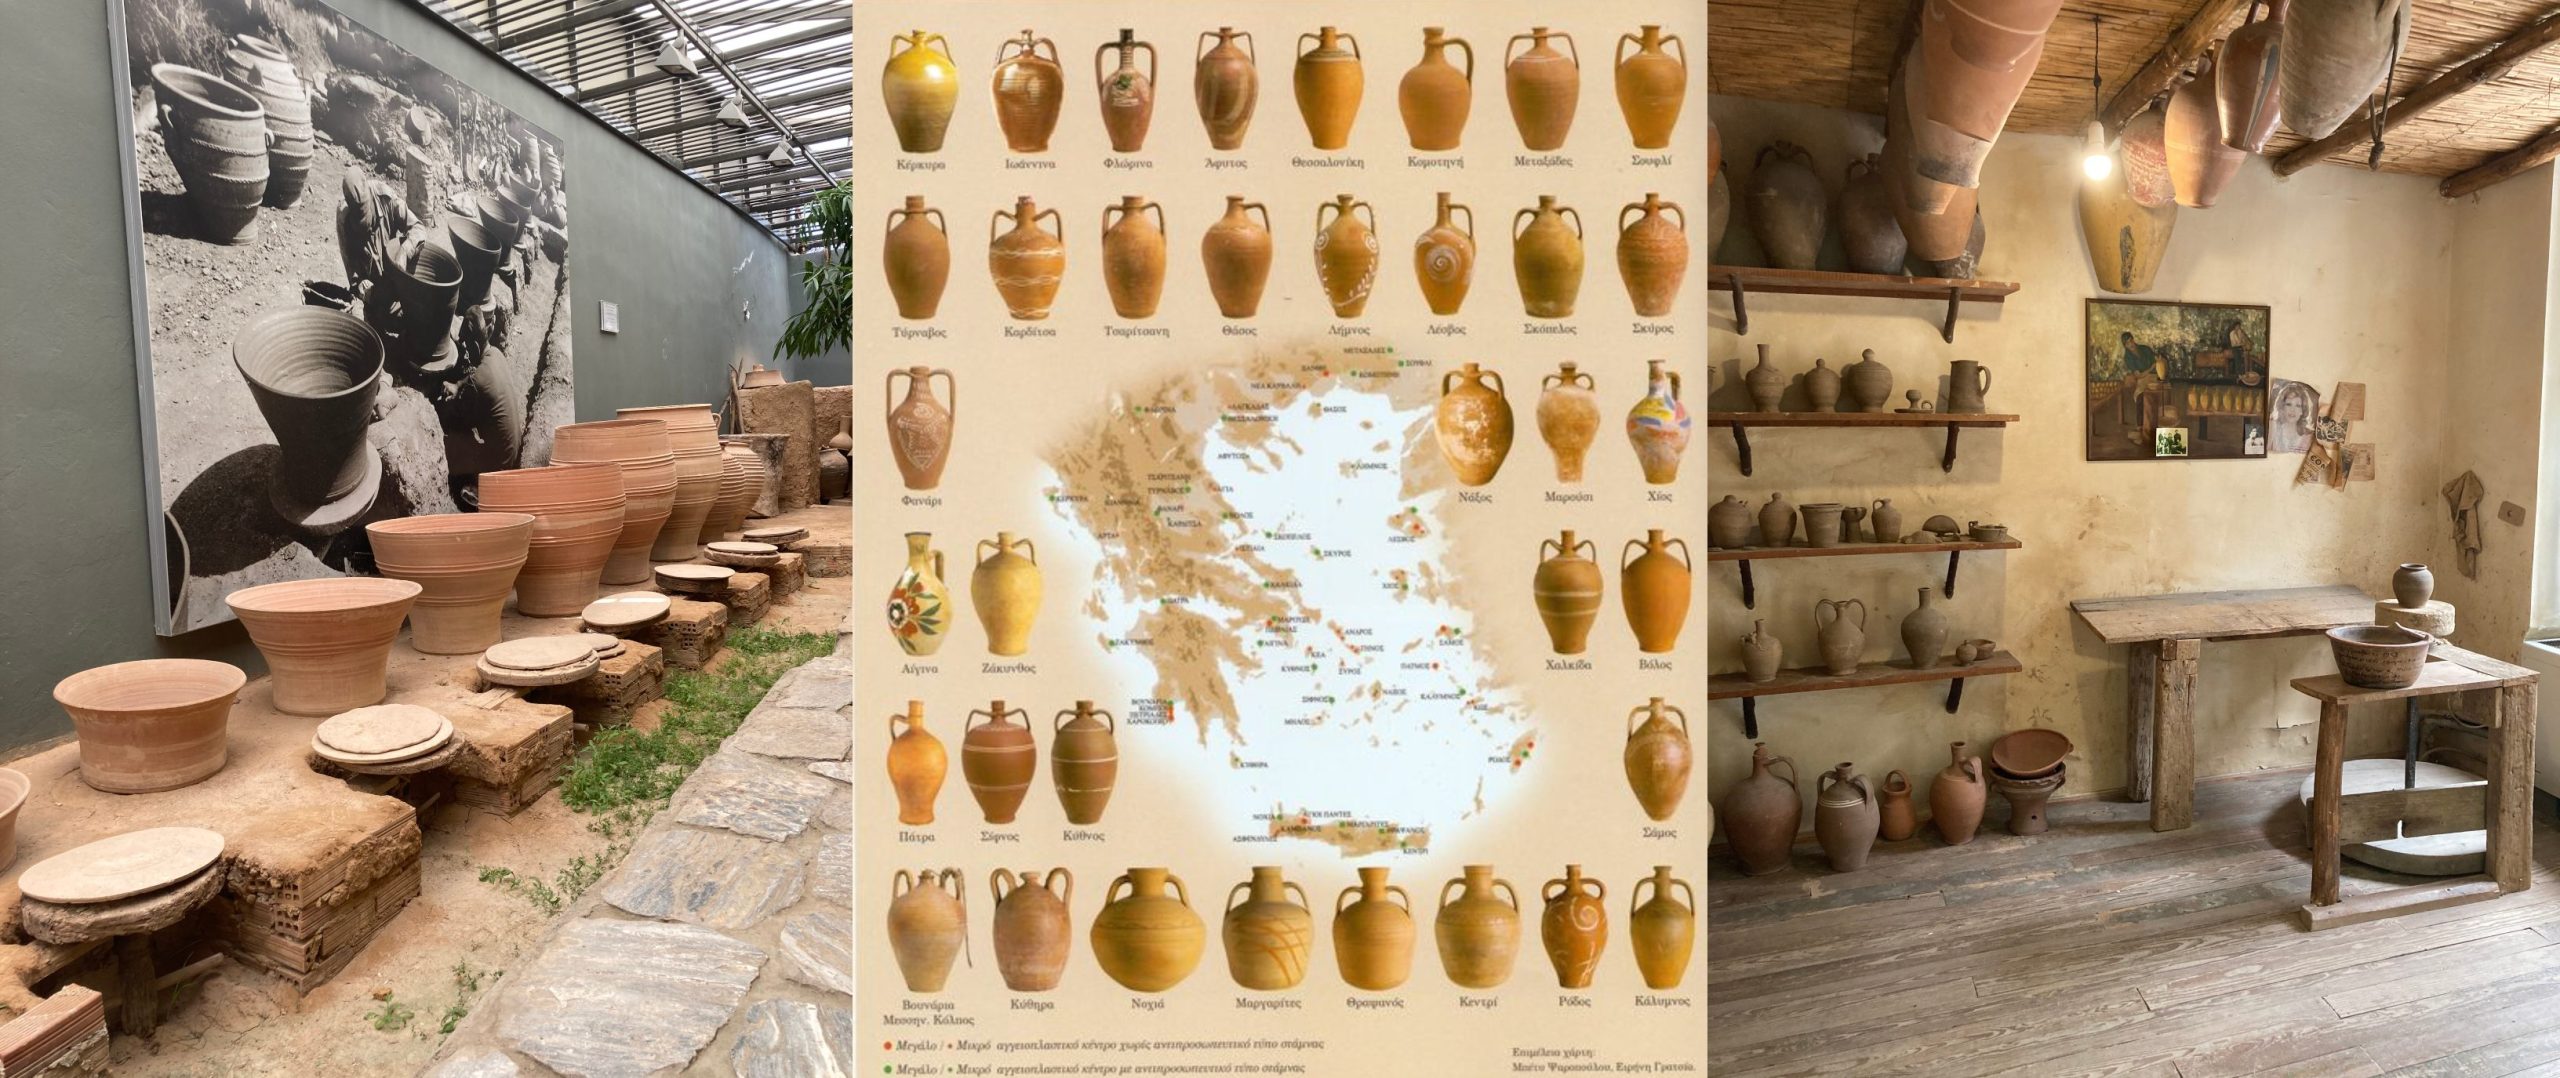 pottery museum collage